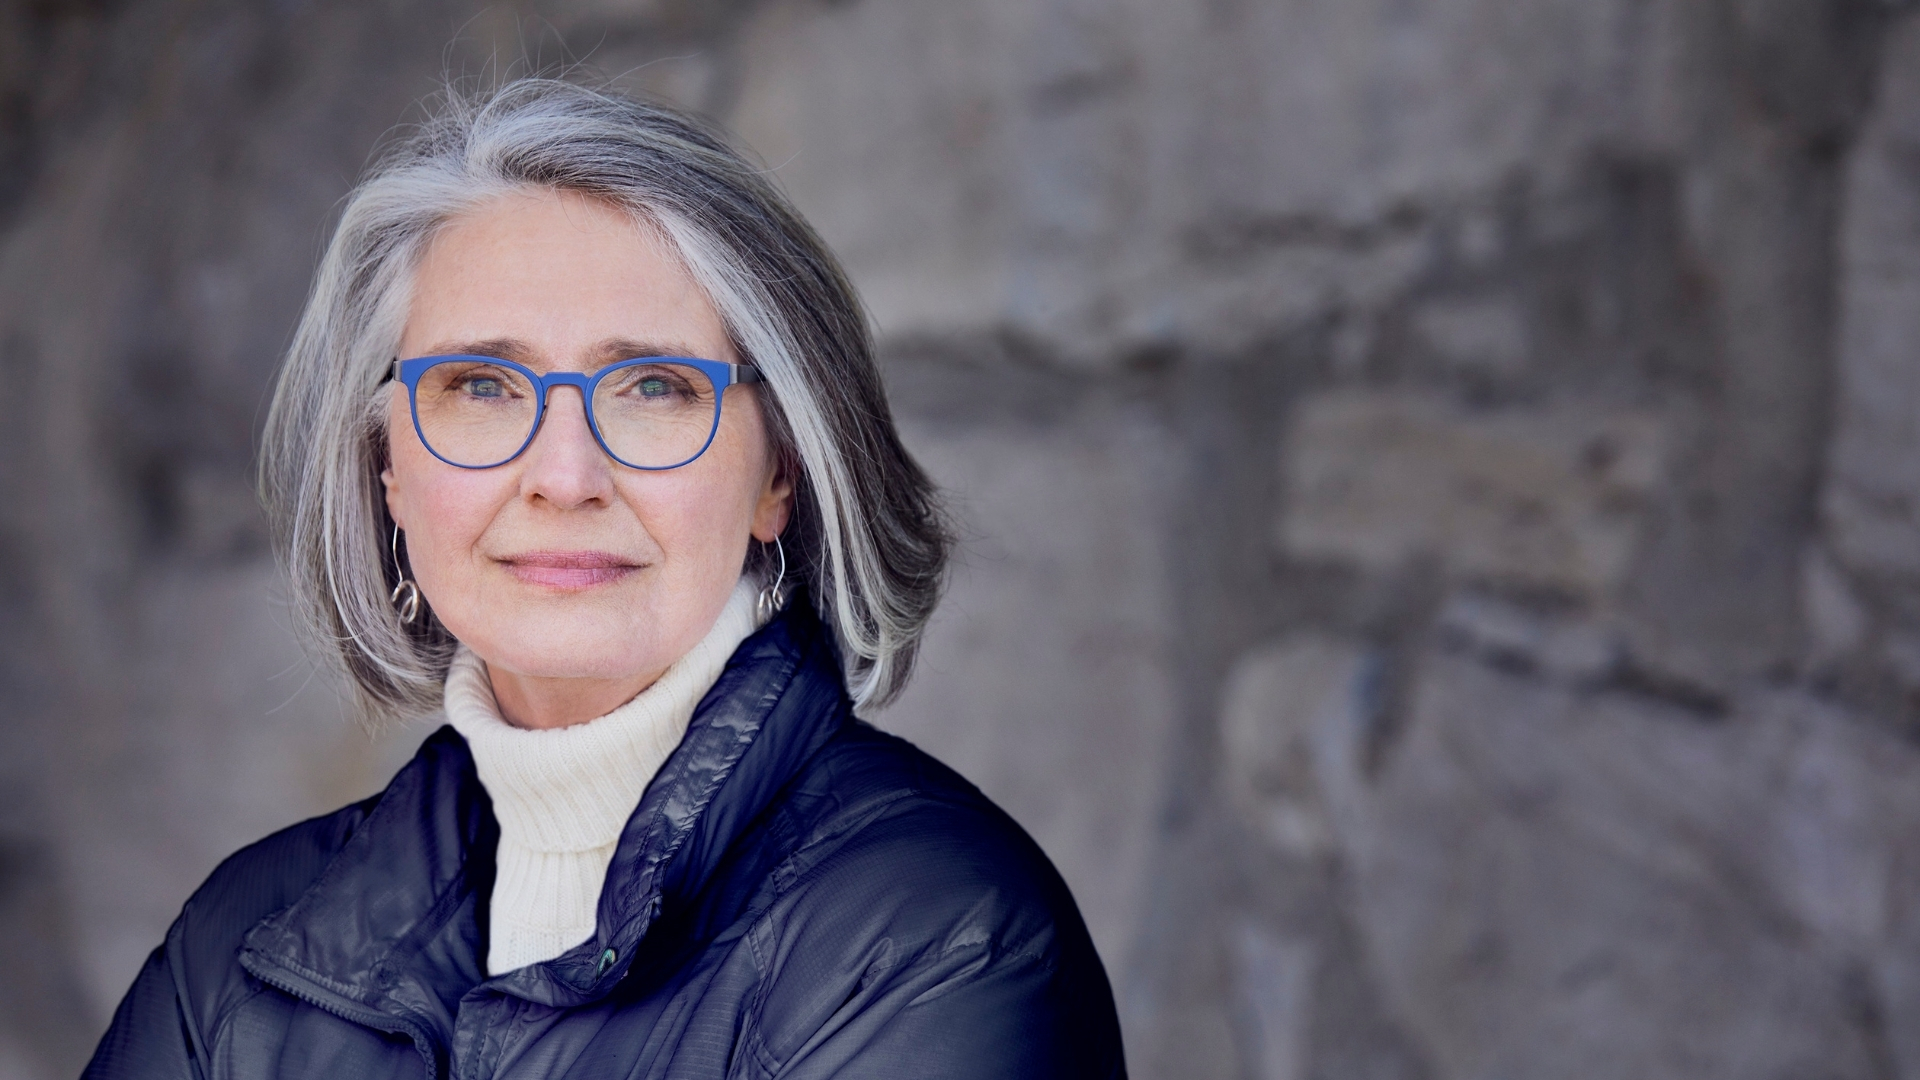 New narrator for Louise Penny's Inspector Gamache is a pitch perfect  replacement